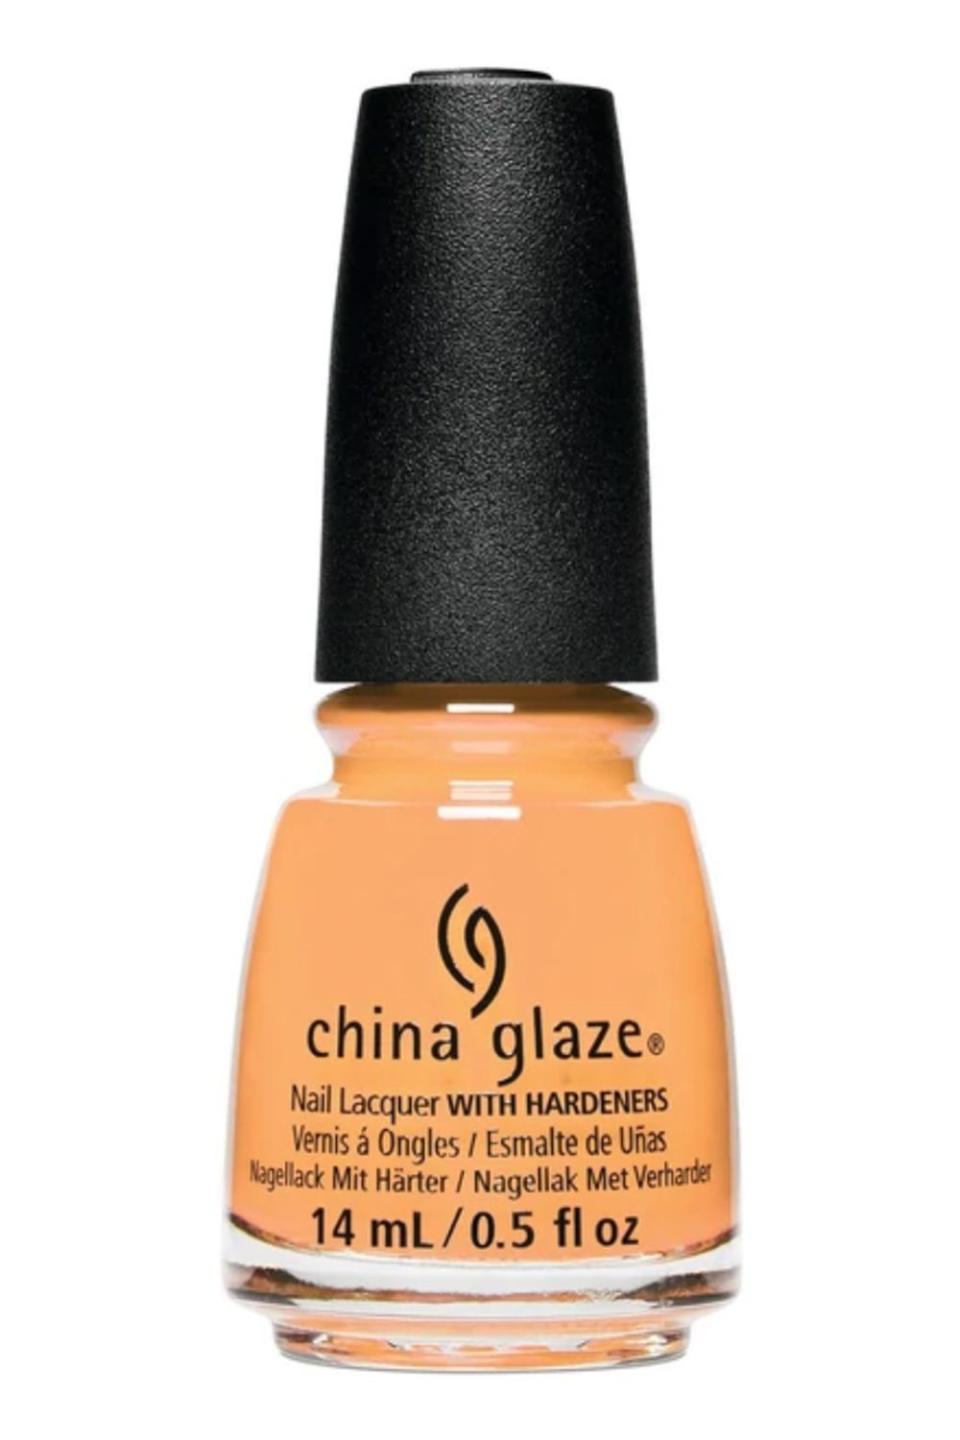 6) China Glaze Nail Lacquer with Hardeners in Tangerine Heat